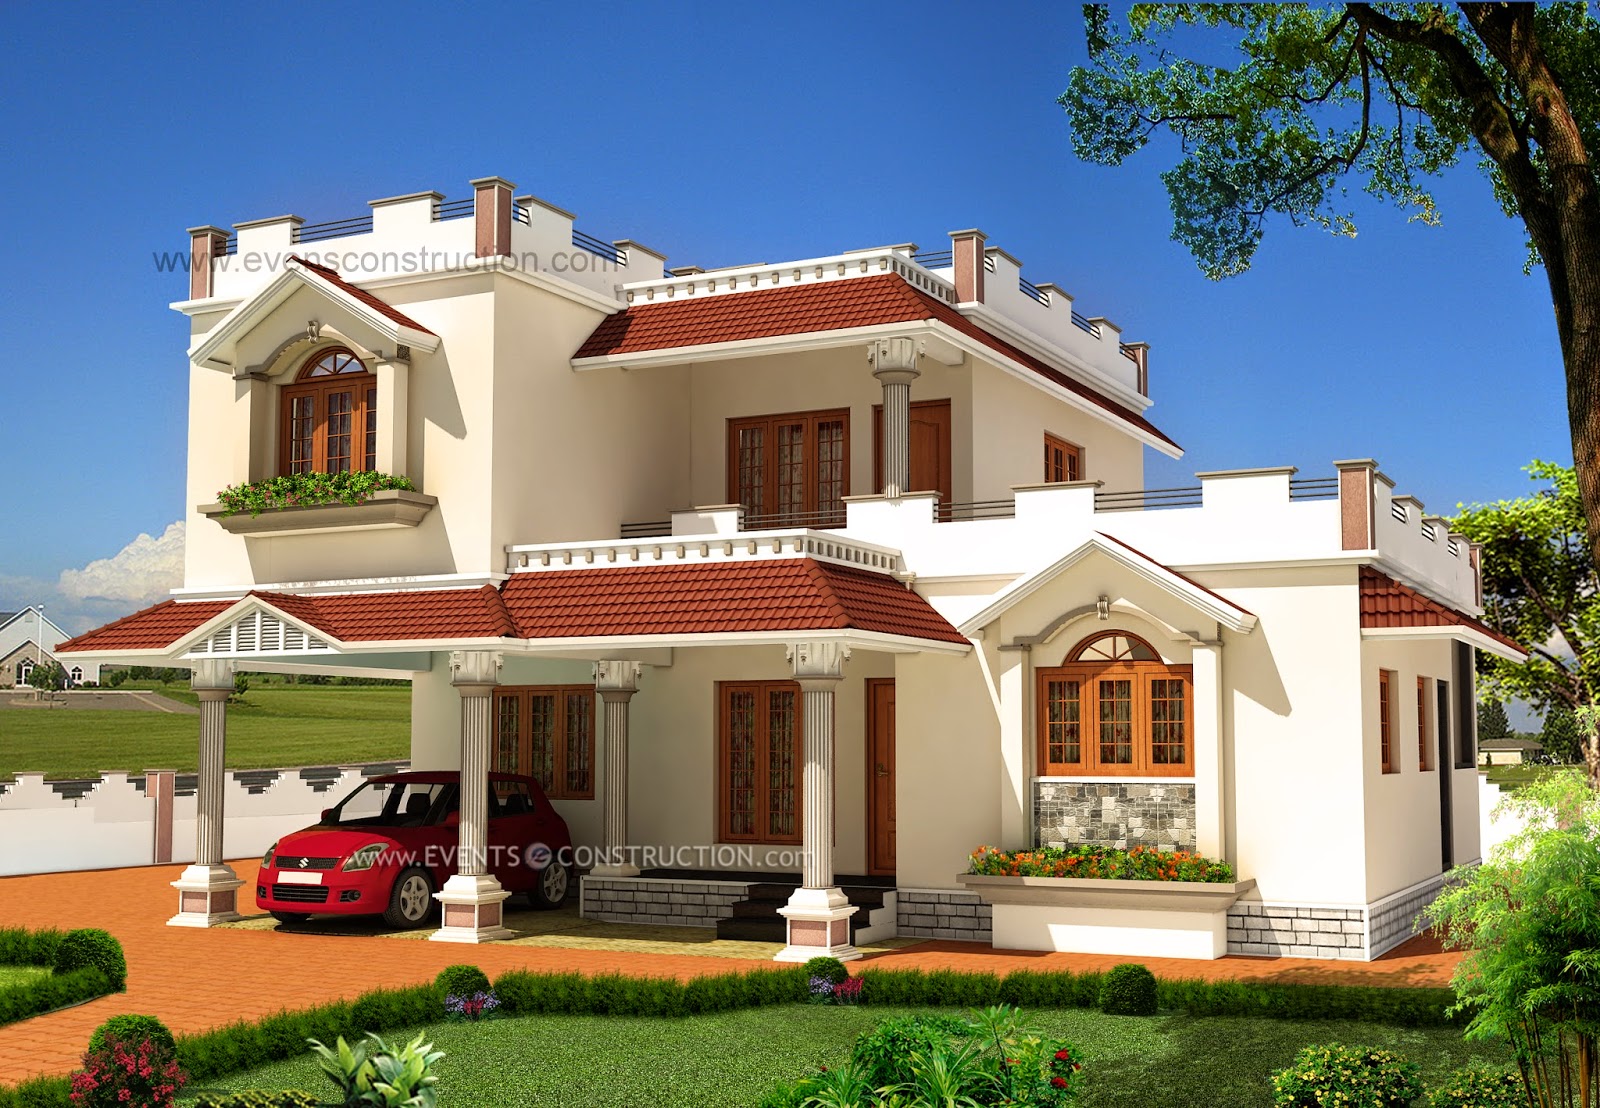 Evens Construction Pvt Ltd: Exterior design of house in India